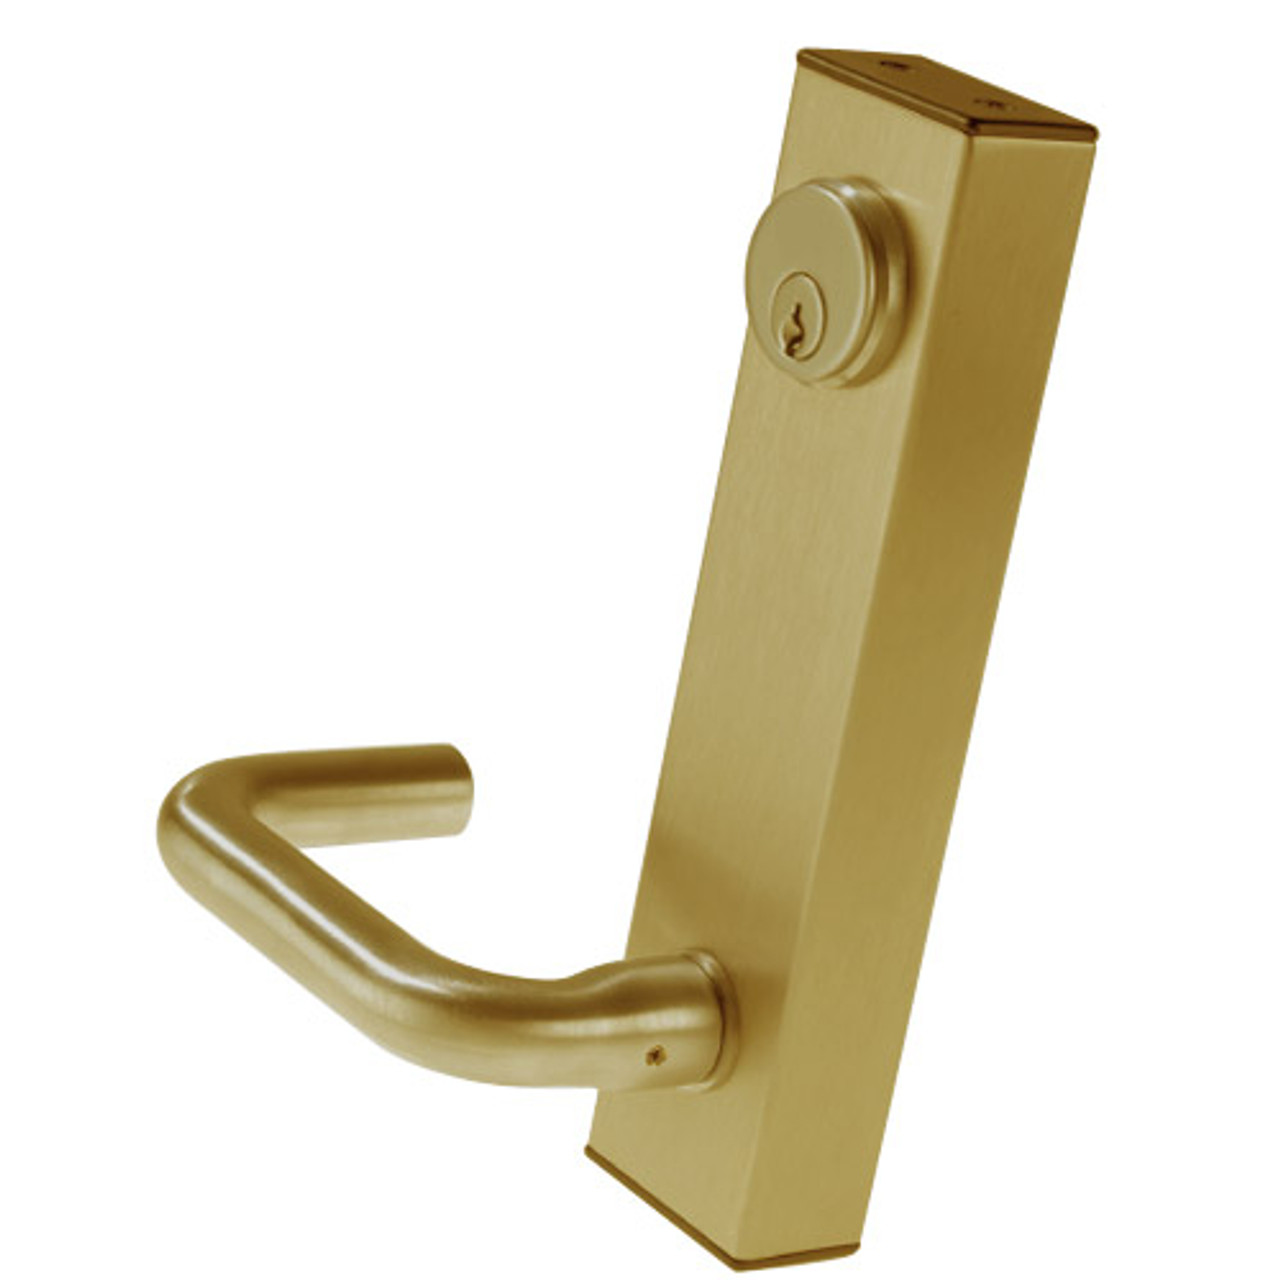 3080E-02-0-34-35 US4 Adams Rite Electrified Entry Trim with Round Lever in Satin Brass Finish